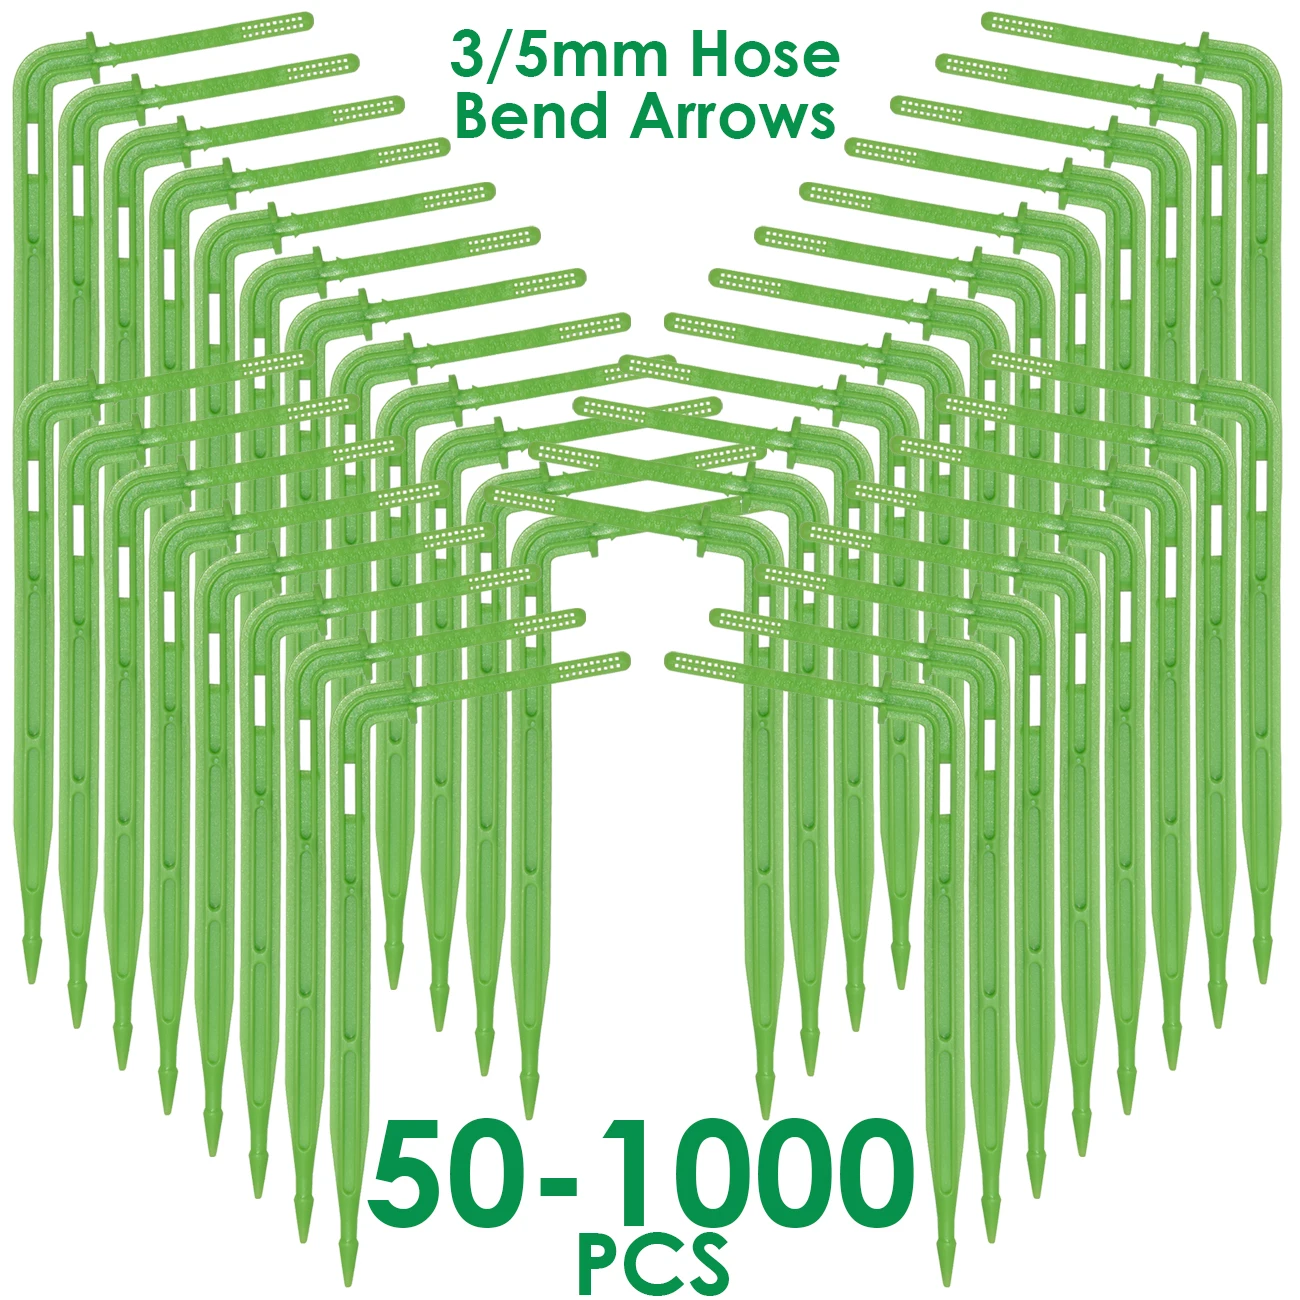 

KESLA 50-1000PCS 1/8'' Green Drippers 3/5mm Bending Arrow Emitters Garden Potted Irrigation Watering Micro Drip System Fittings